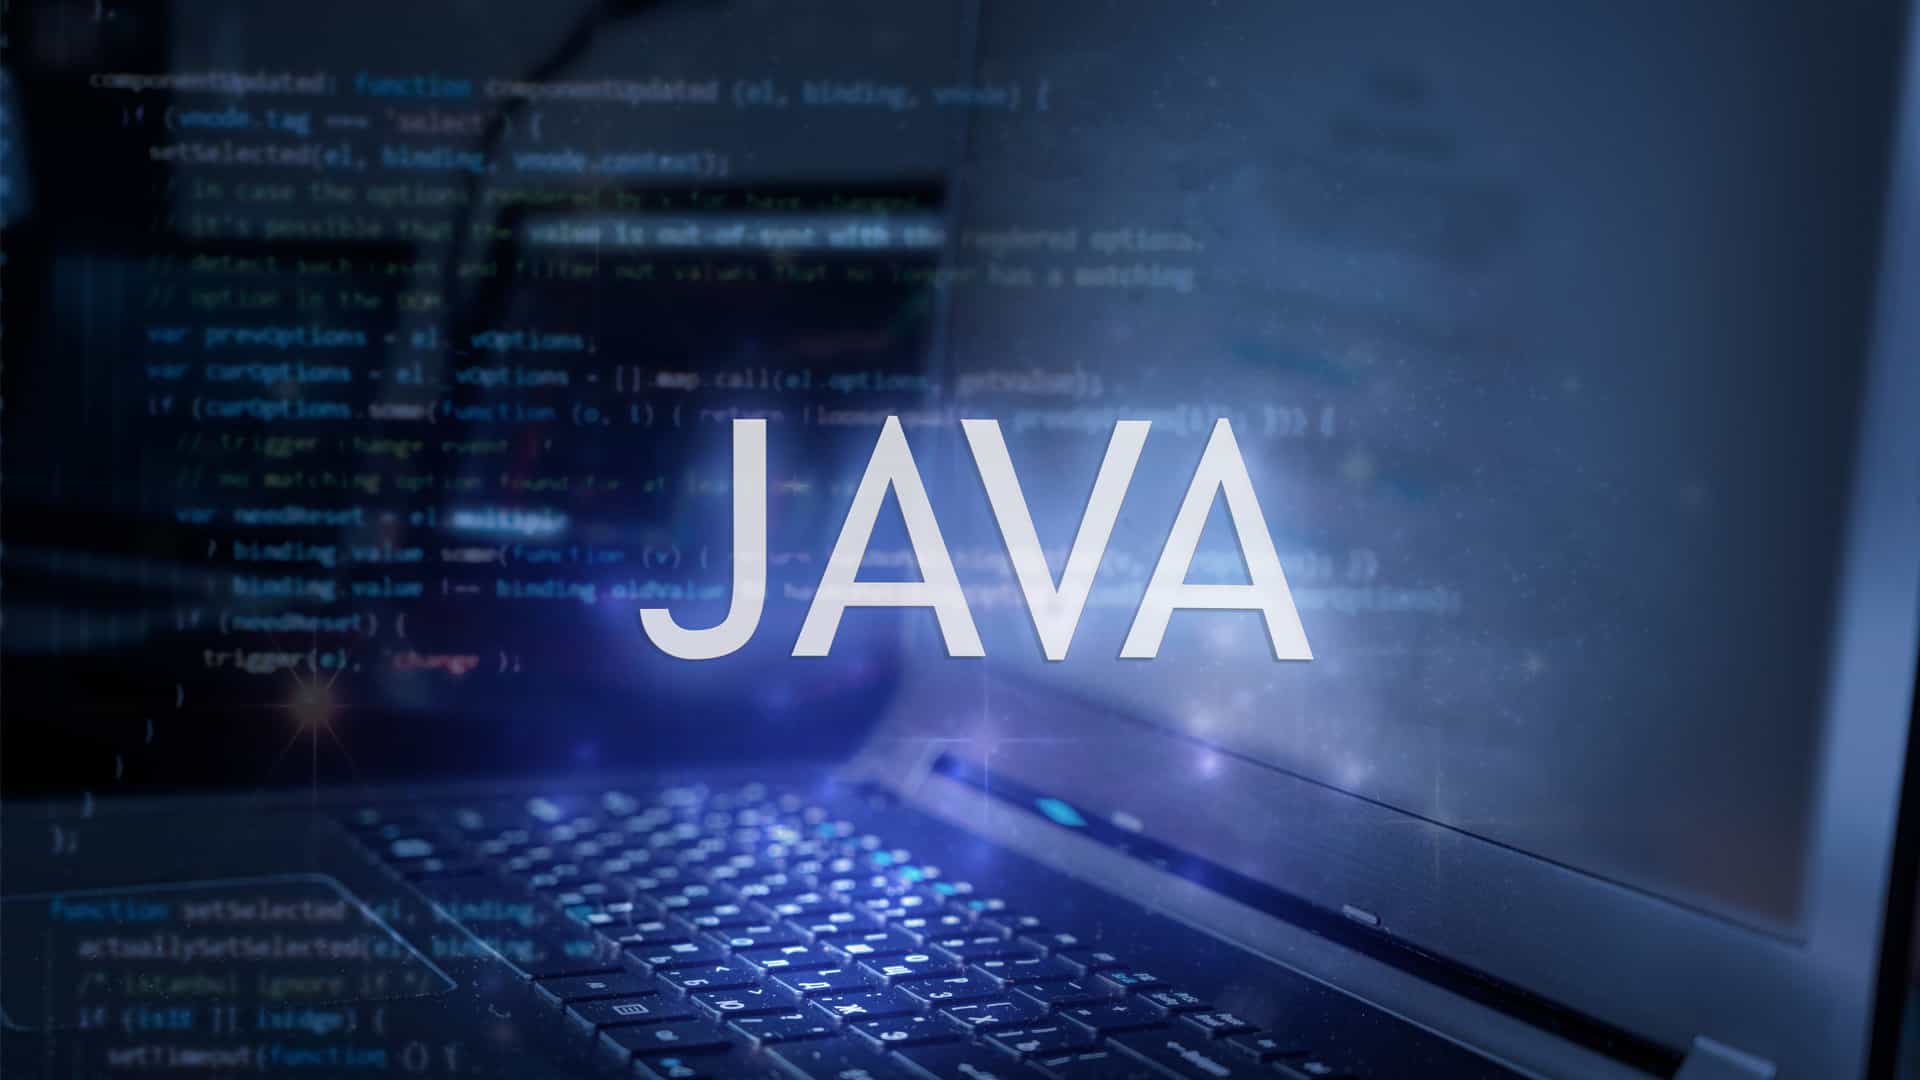 The word JAVA floating in front of a computer screen